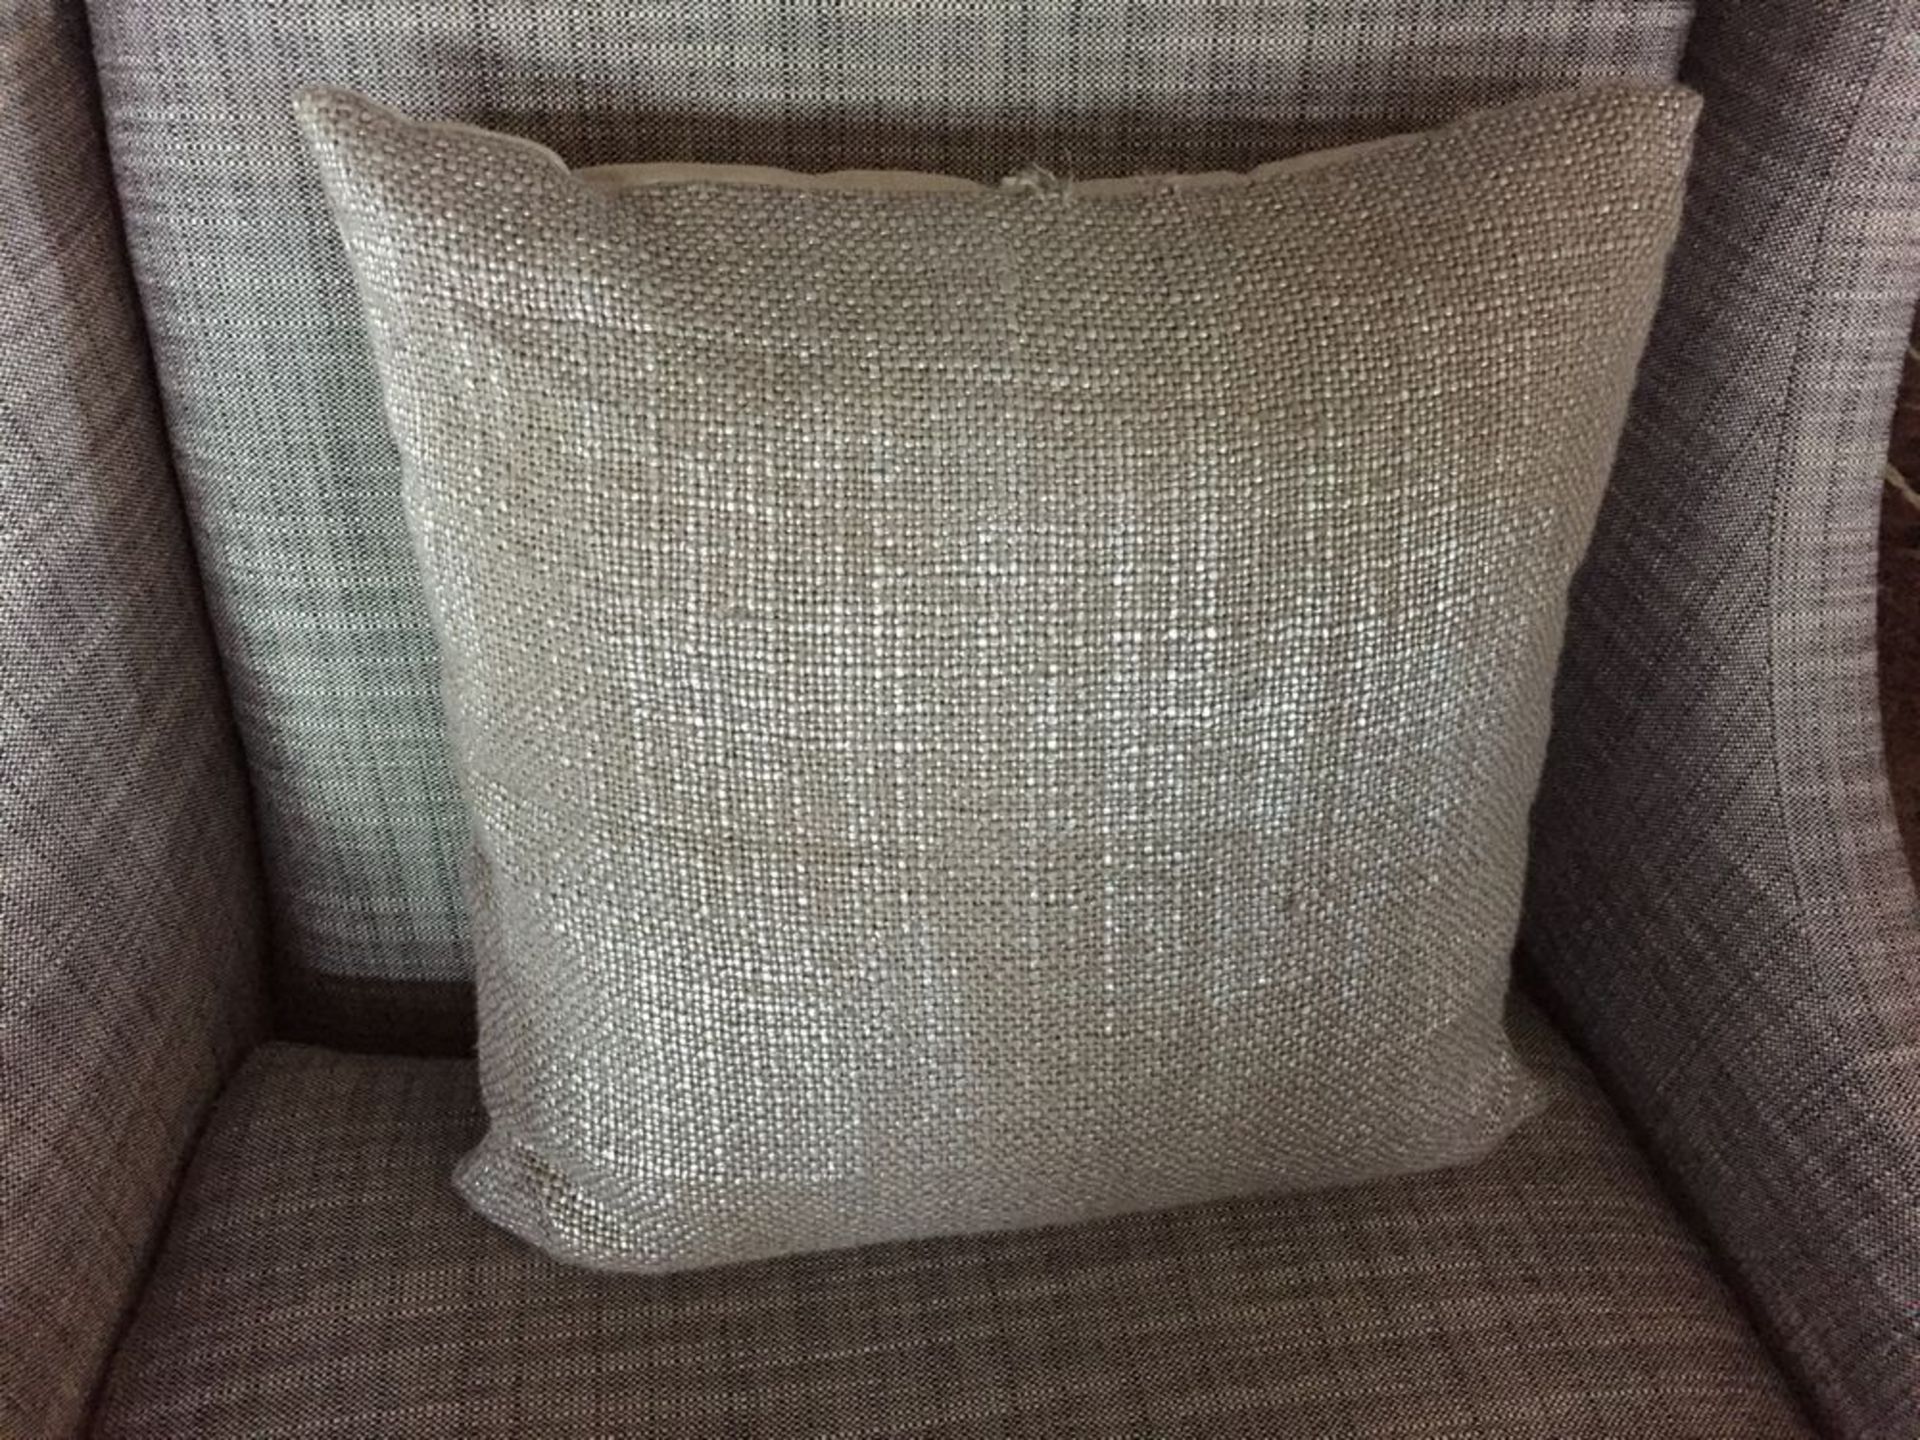 Furniture Asset: LOT OF: 16 qty: Pillow Pillow, 18"W x 6"D x 18"H, Orig. price: $40, new in 2015-